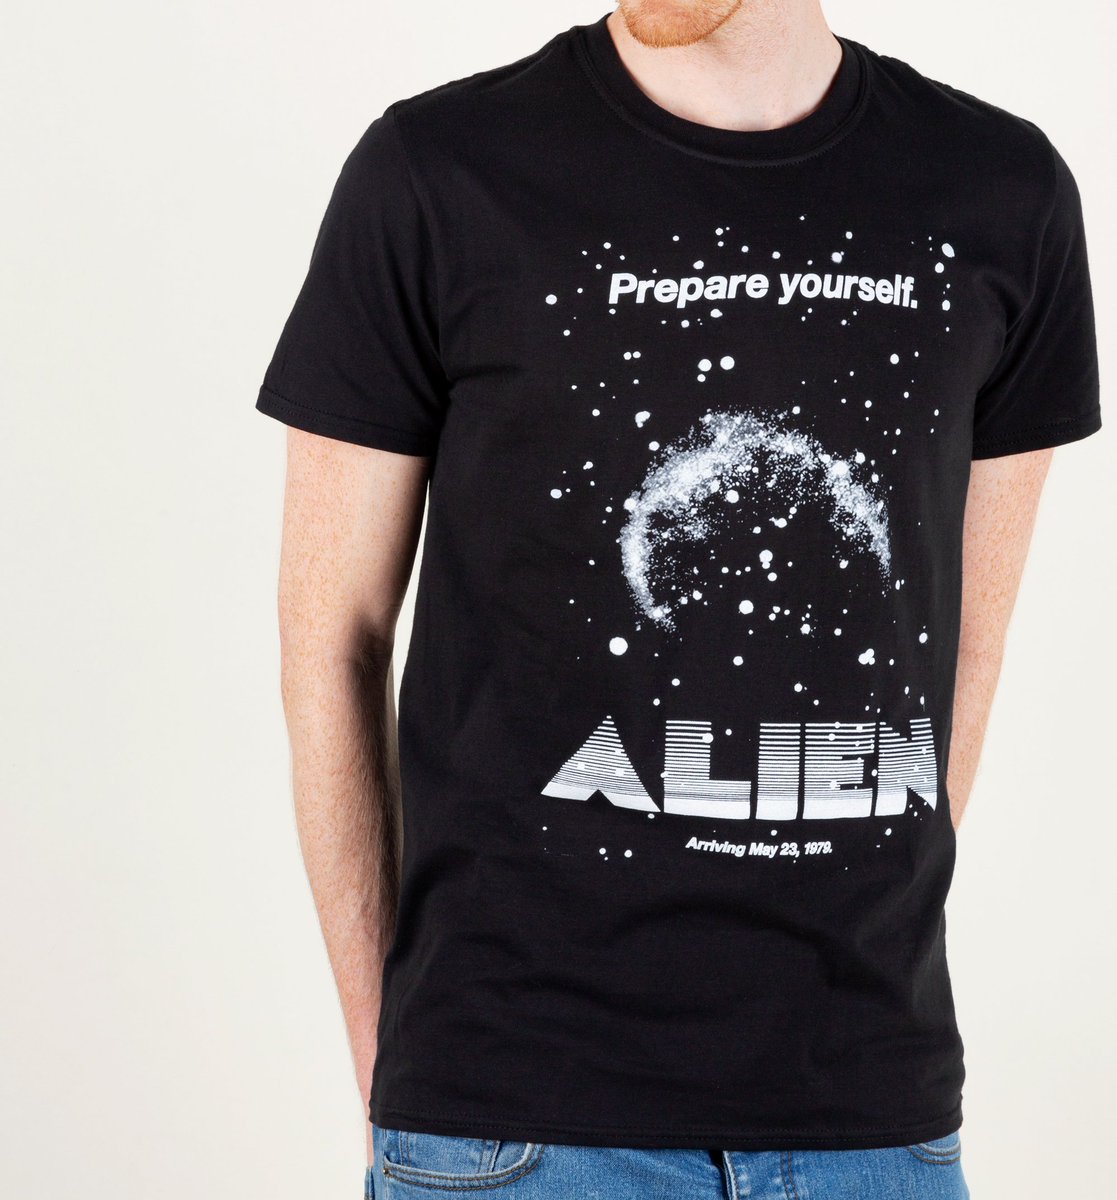 In space, no-one can hear you scream…with joy, at these extra-terrestrially awesome Alien tees! An out-of-this-world way to celebrate the space spectacular 👽 truff.sh/AlienTees